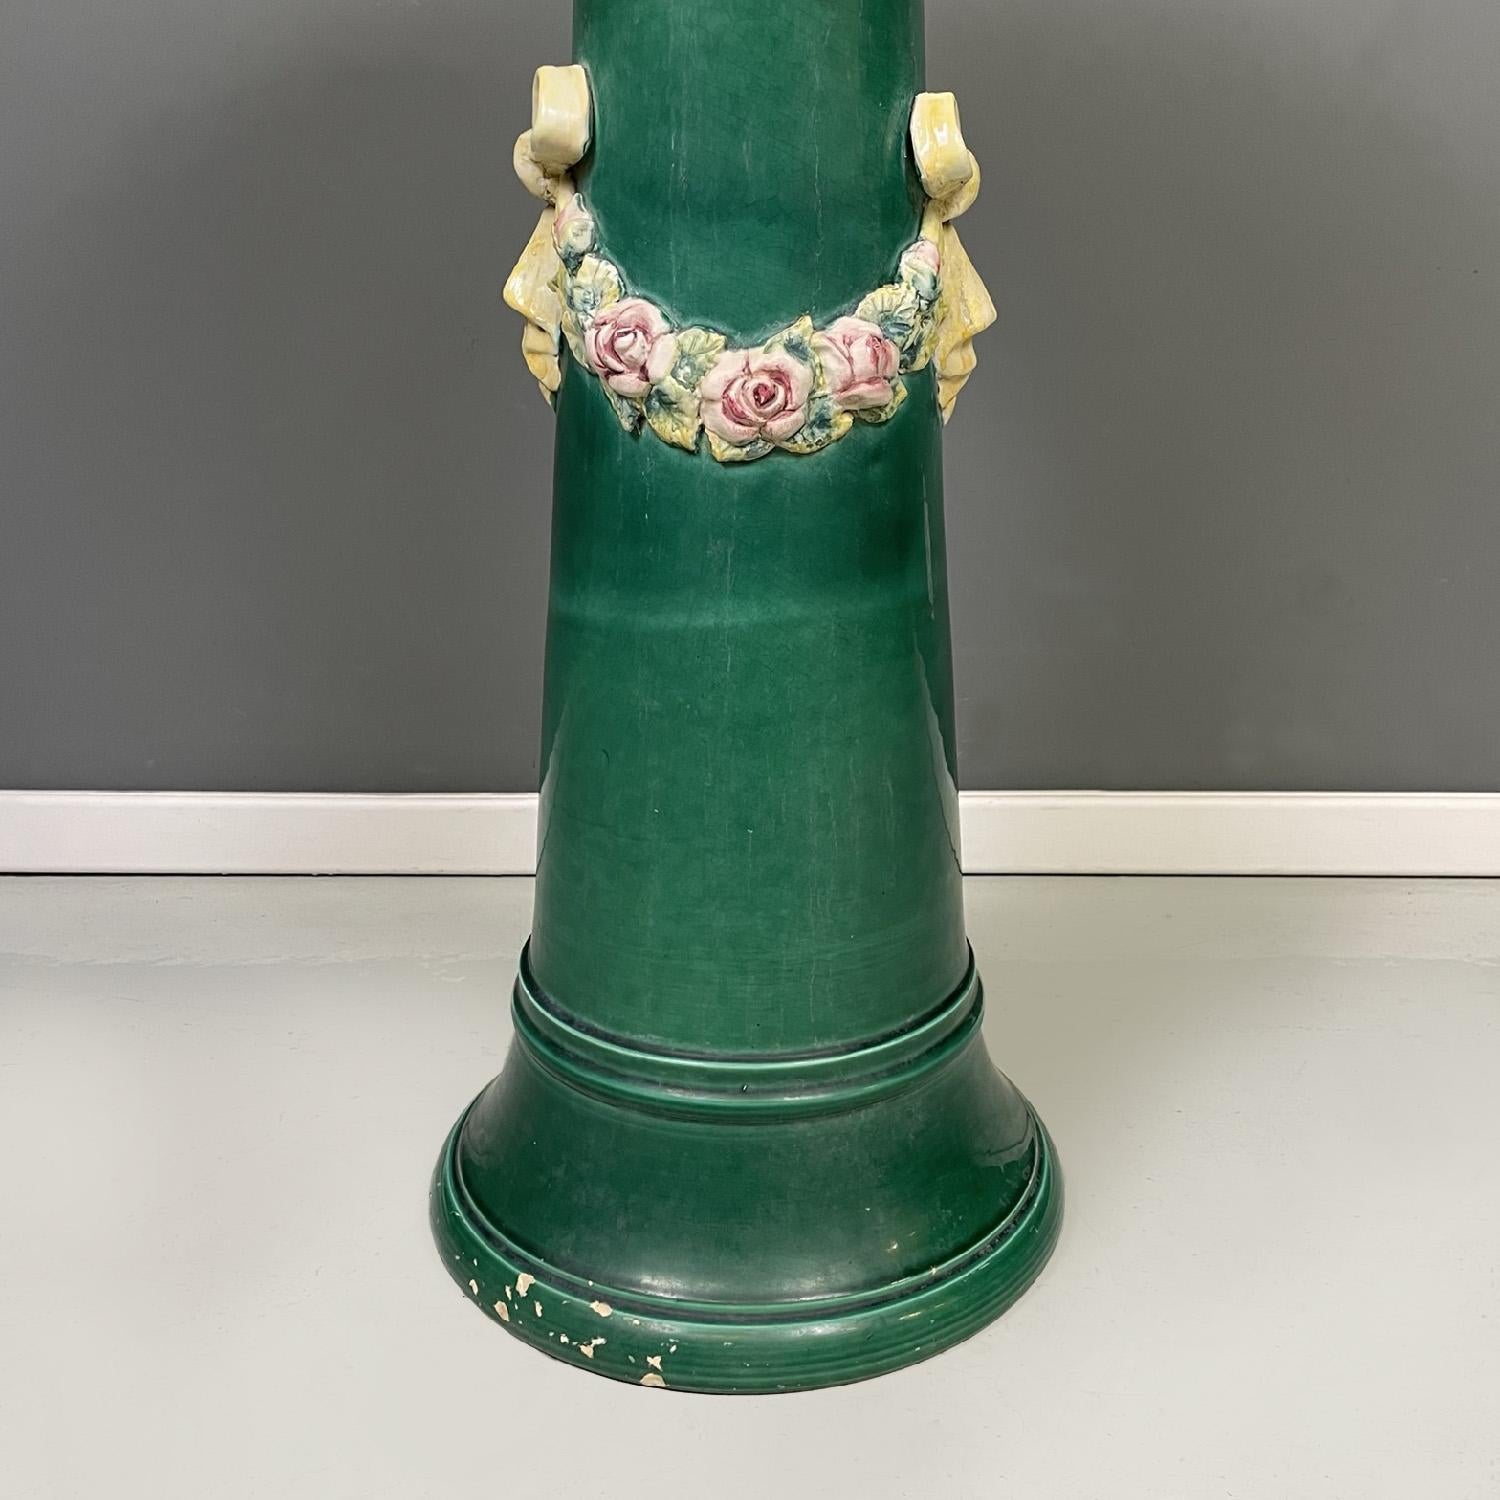 Italian imperial style green ceramic columns pedestals bows and flowers, 1930s For Sale 2